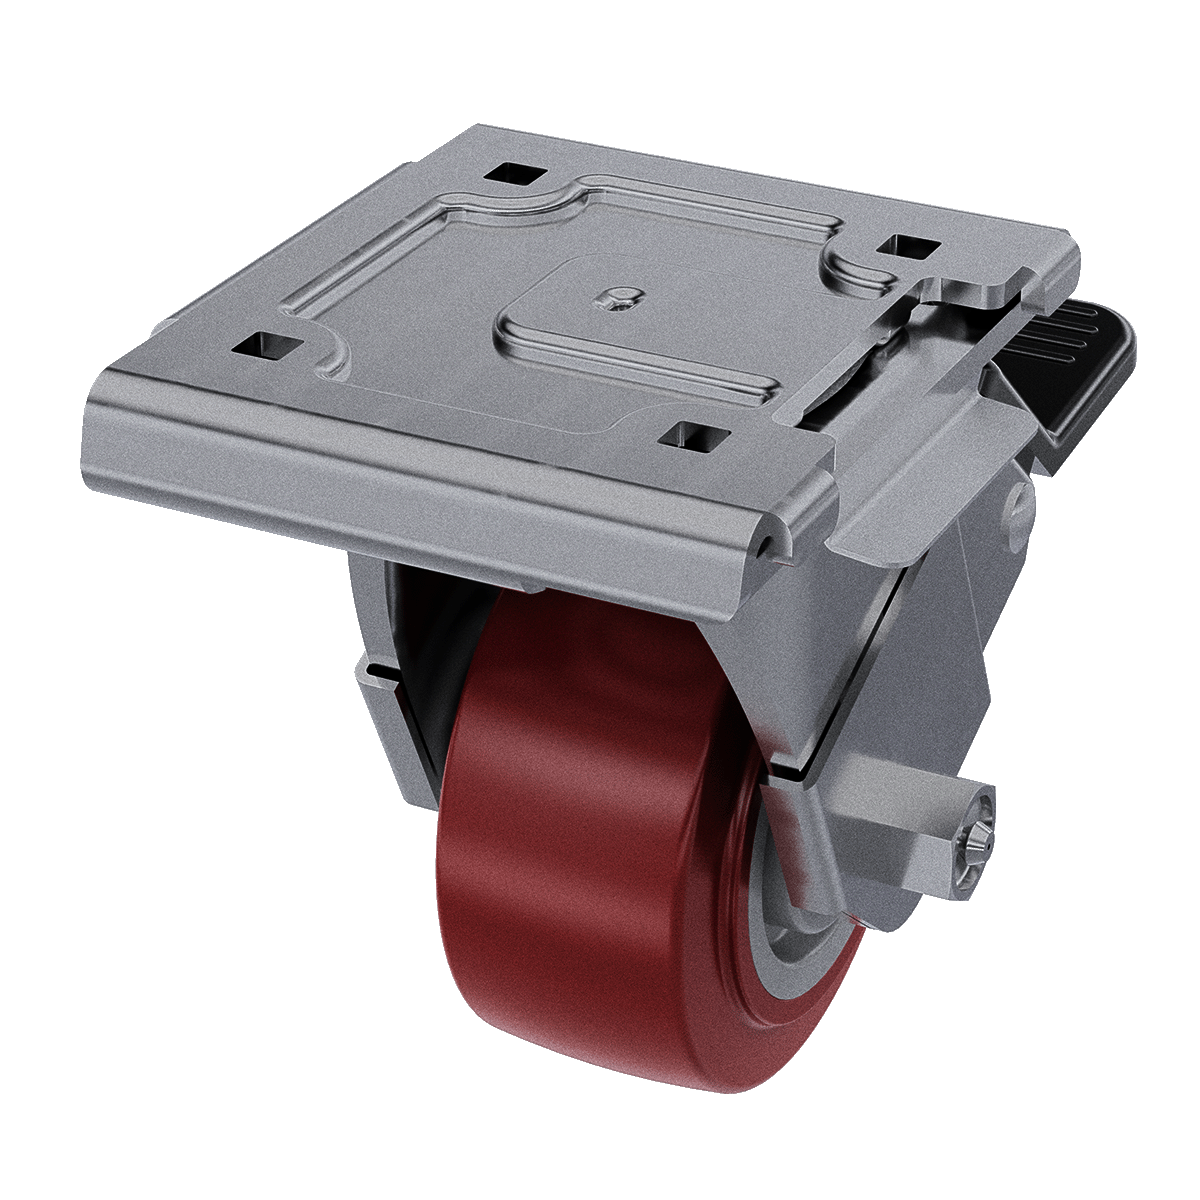 4x2 swivel caster shown mounted into large quick release caster plate